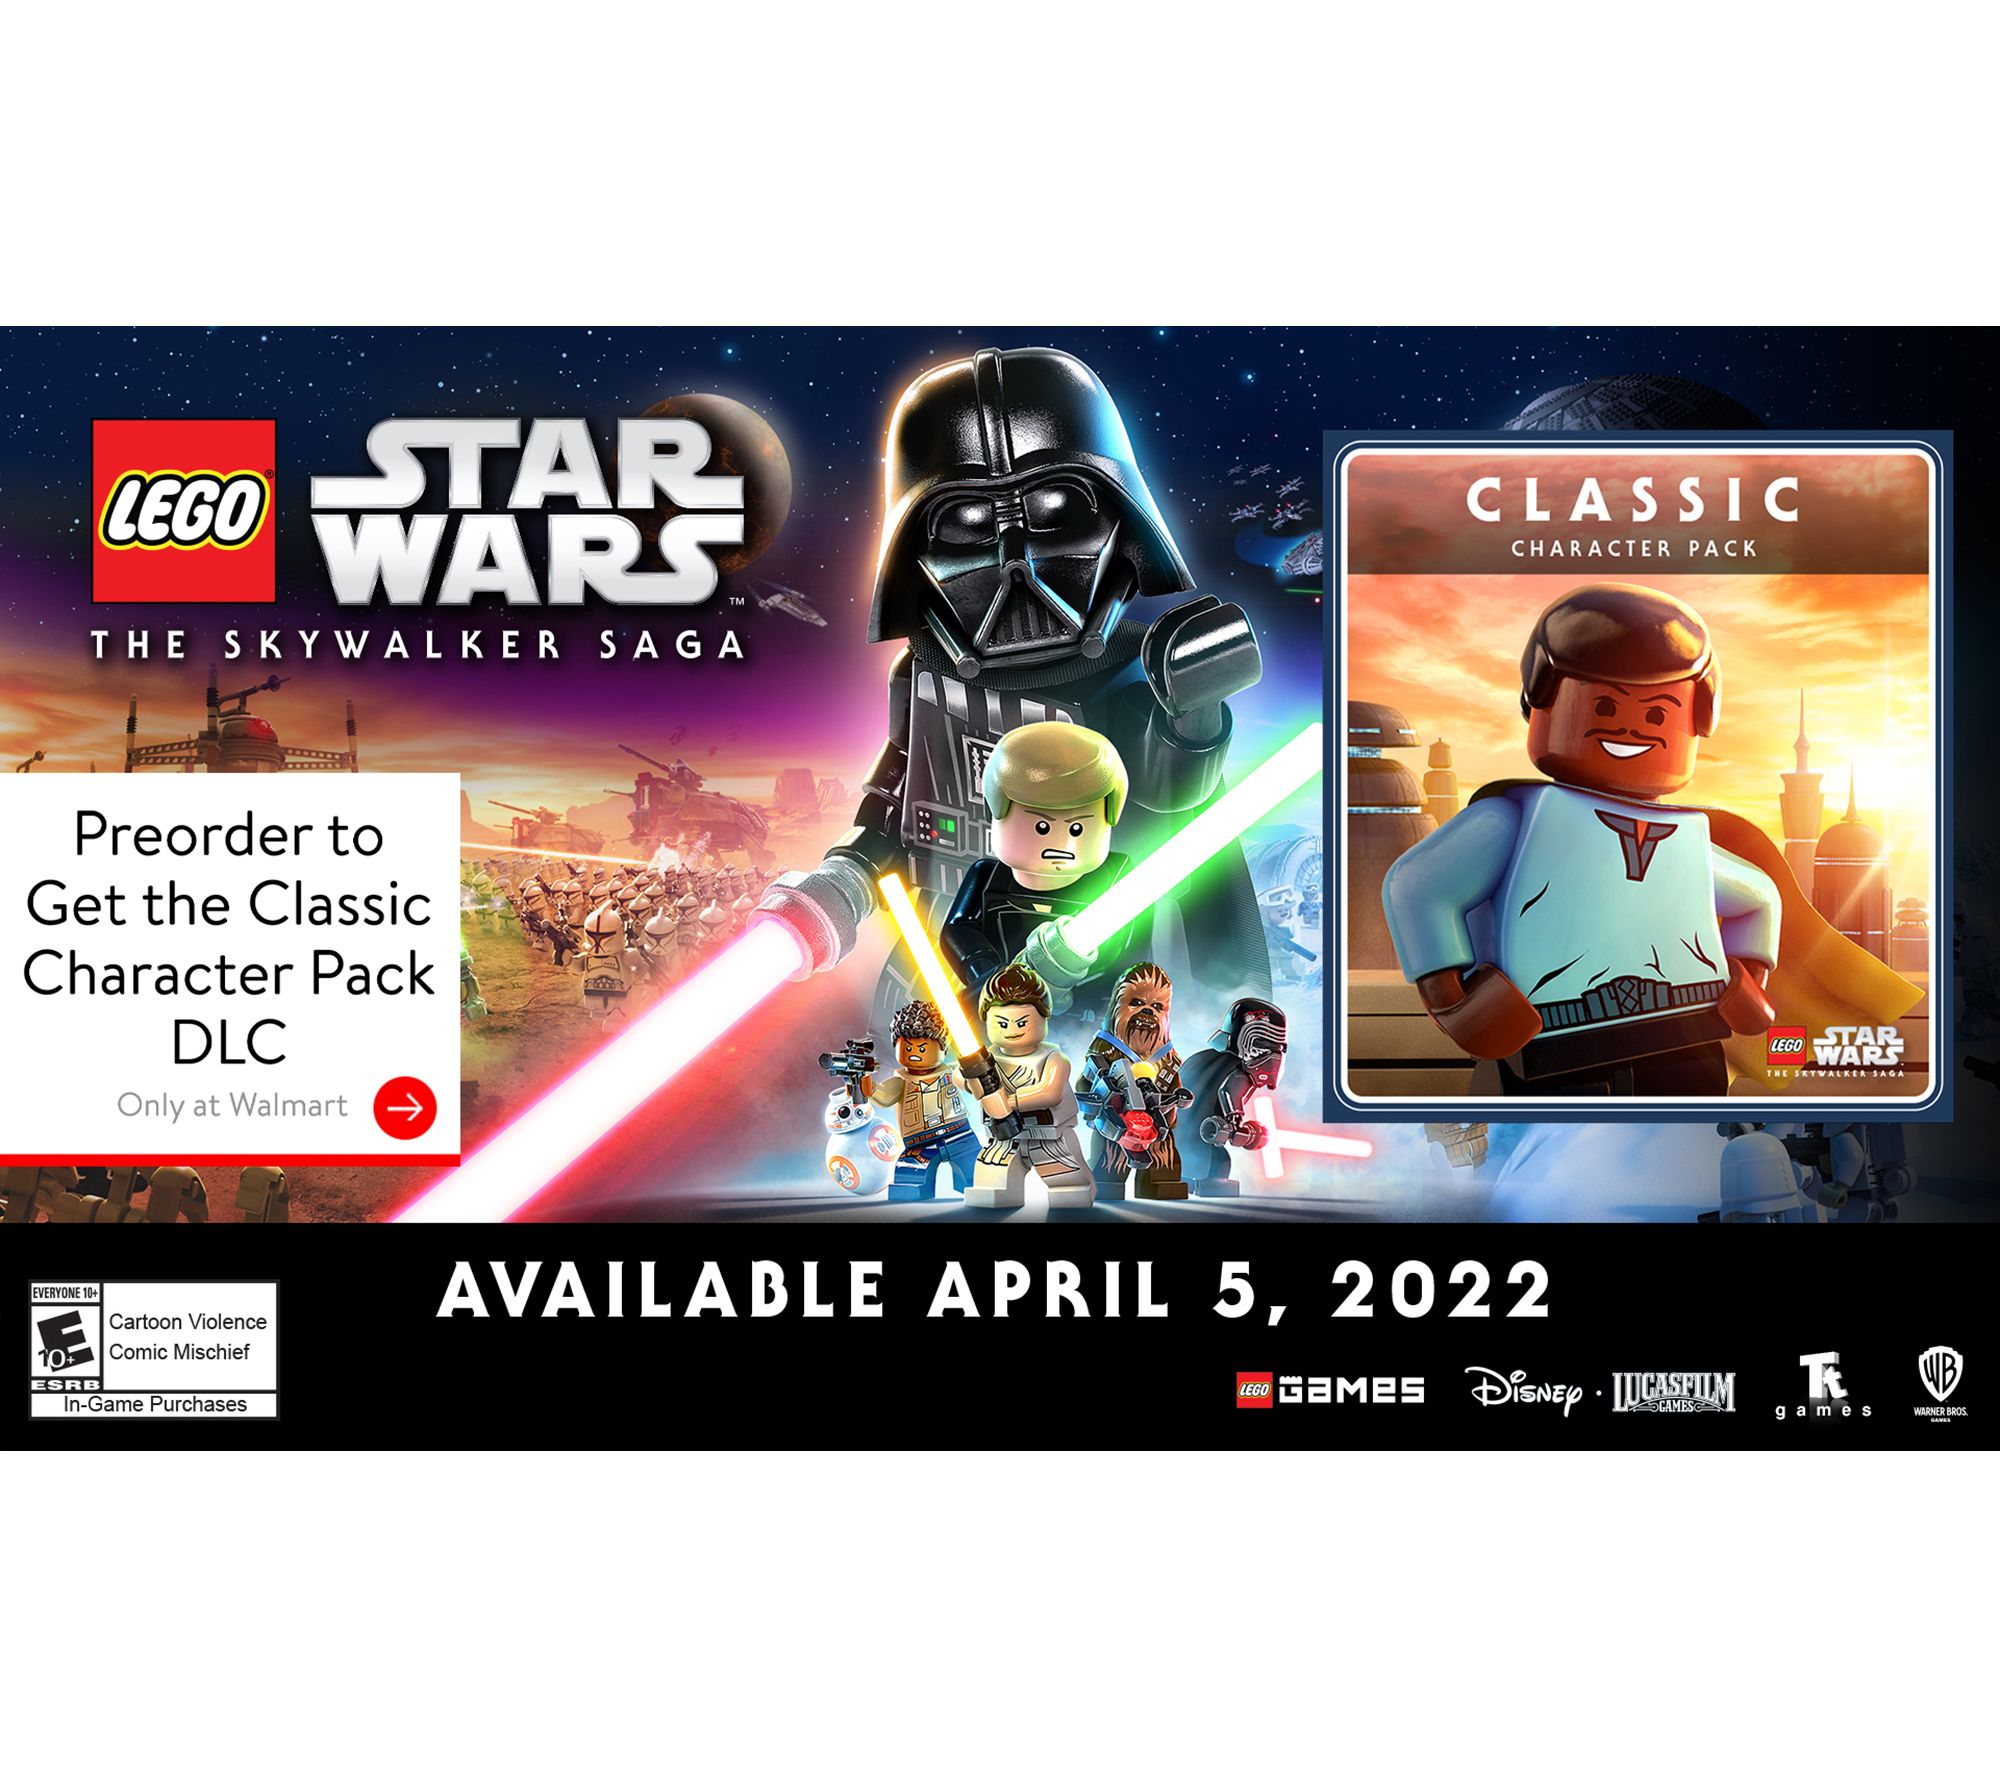 Deluxe Edition of LEGO Star Wars: The Skywalker Saga Features Removal  Slipcover Packaging - Jedi News